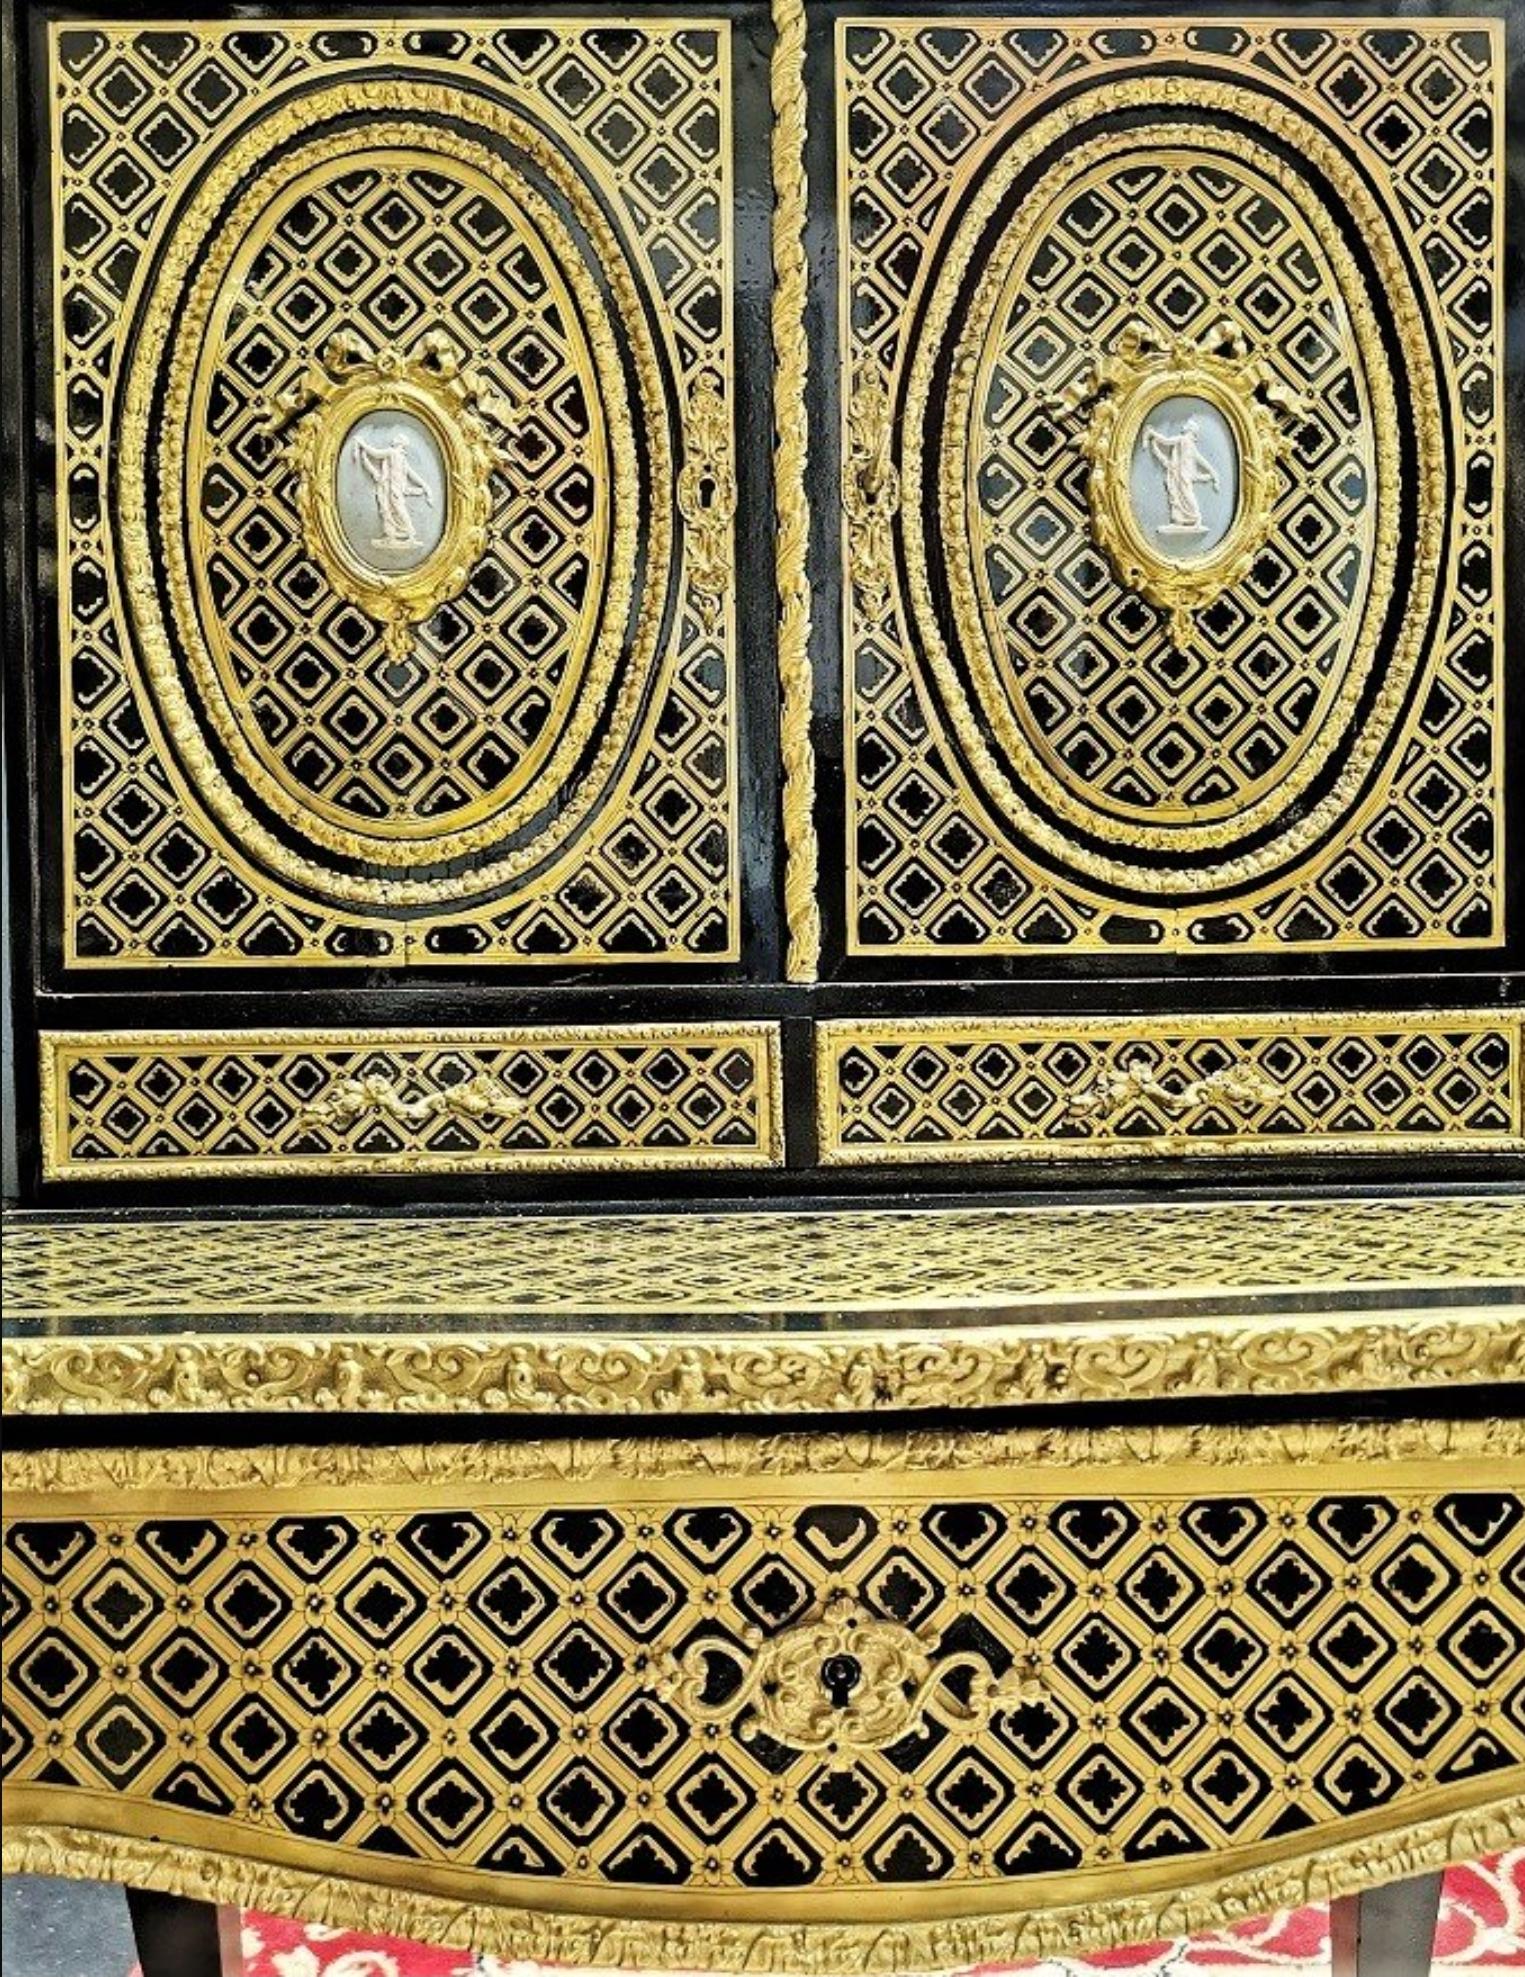 Stunning Napoleon III secretary desk Bonheur du jour style with 2 Wedgwood porcelain medallions on each front door in. Gorgeous Boulle style marquetry details of brass and ebony called 